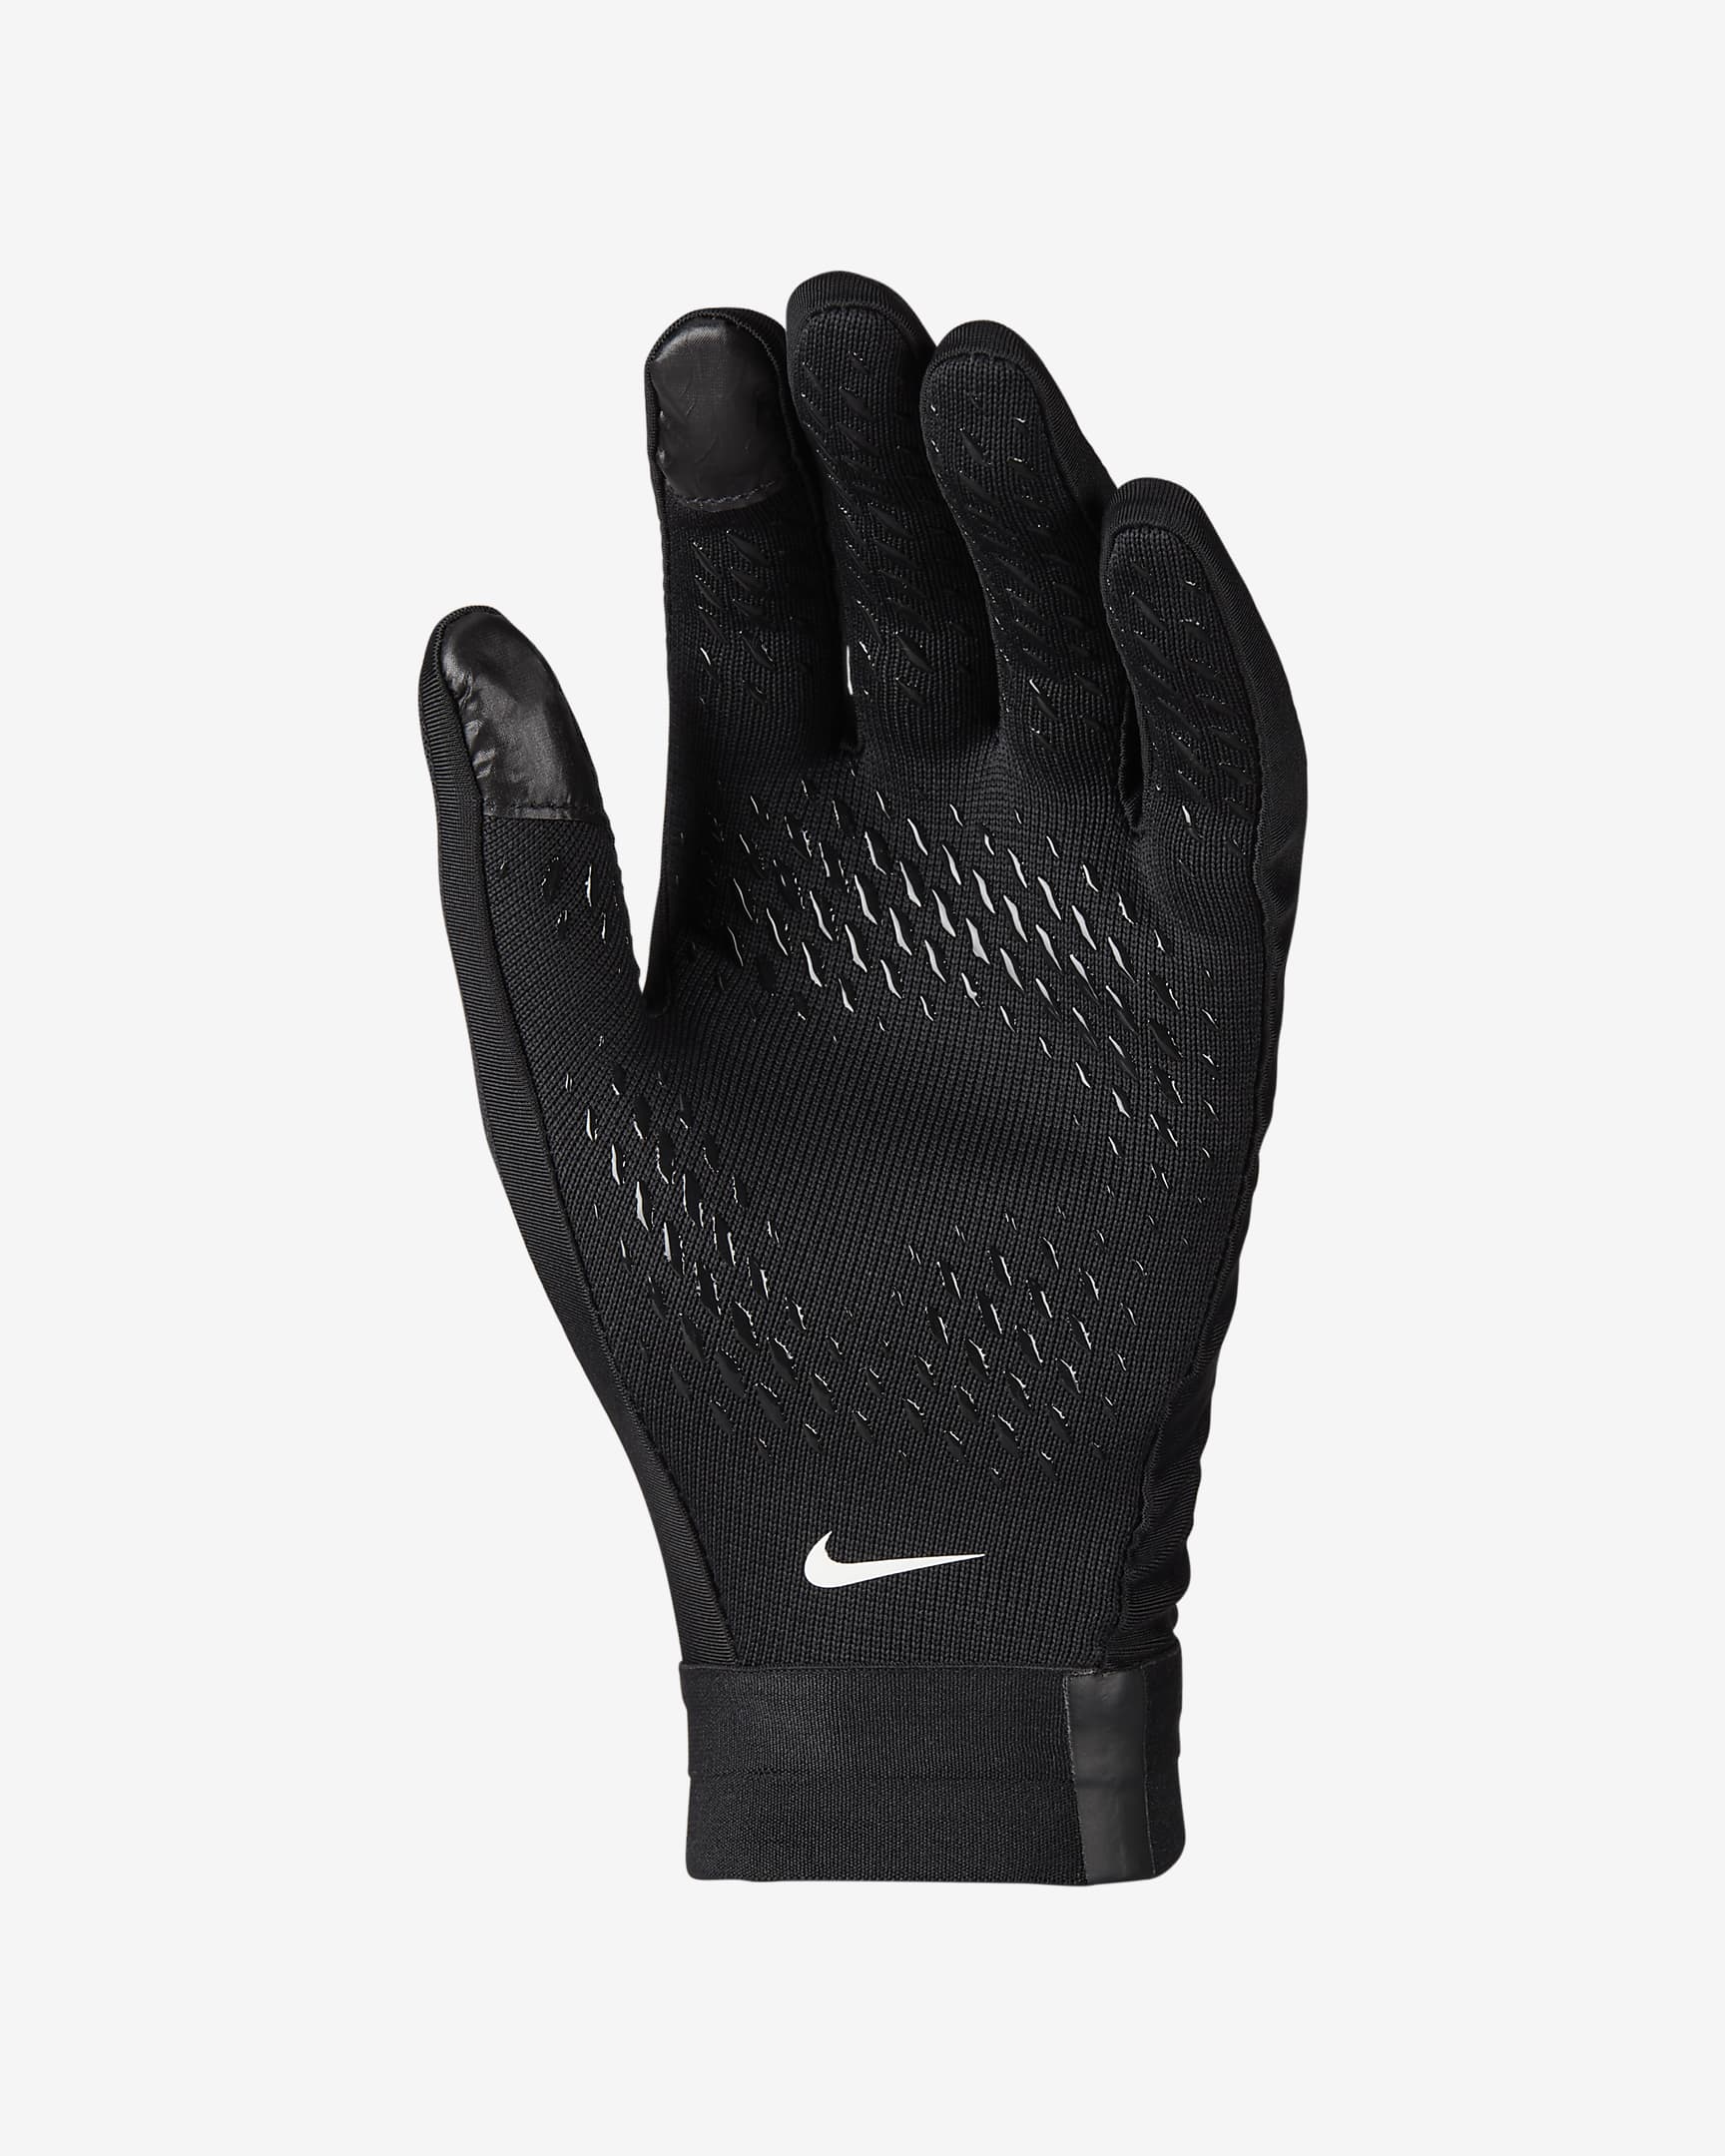 Nike Therma-FIT Academy Football Gloves - Black/Black/White